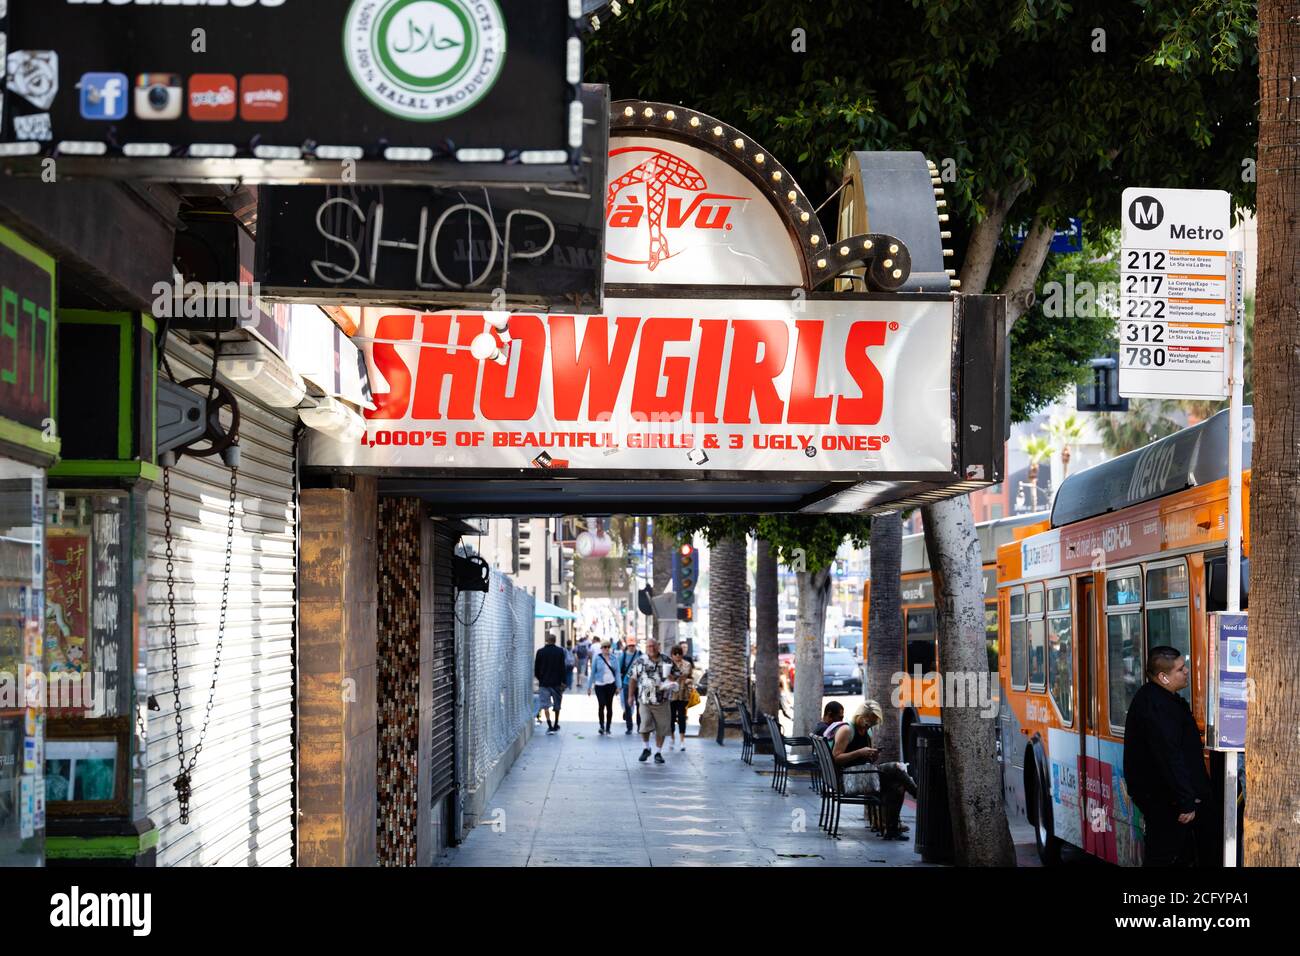 Deja Vu Showgirls strip club front entrance canopy on hollywood Boulevard, Los Angeles California, USA. Bus stop and people. Stock Photo